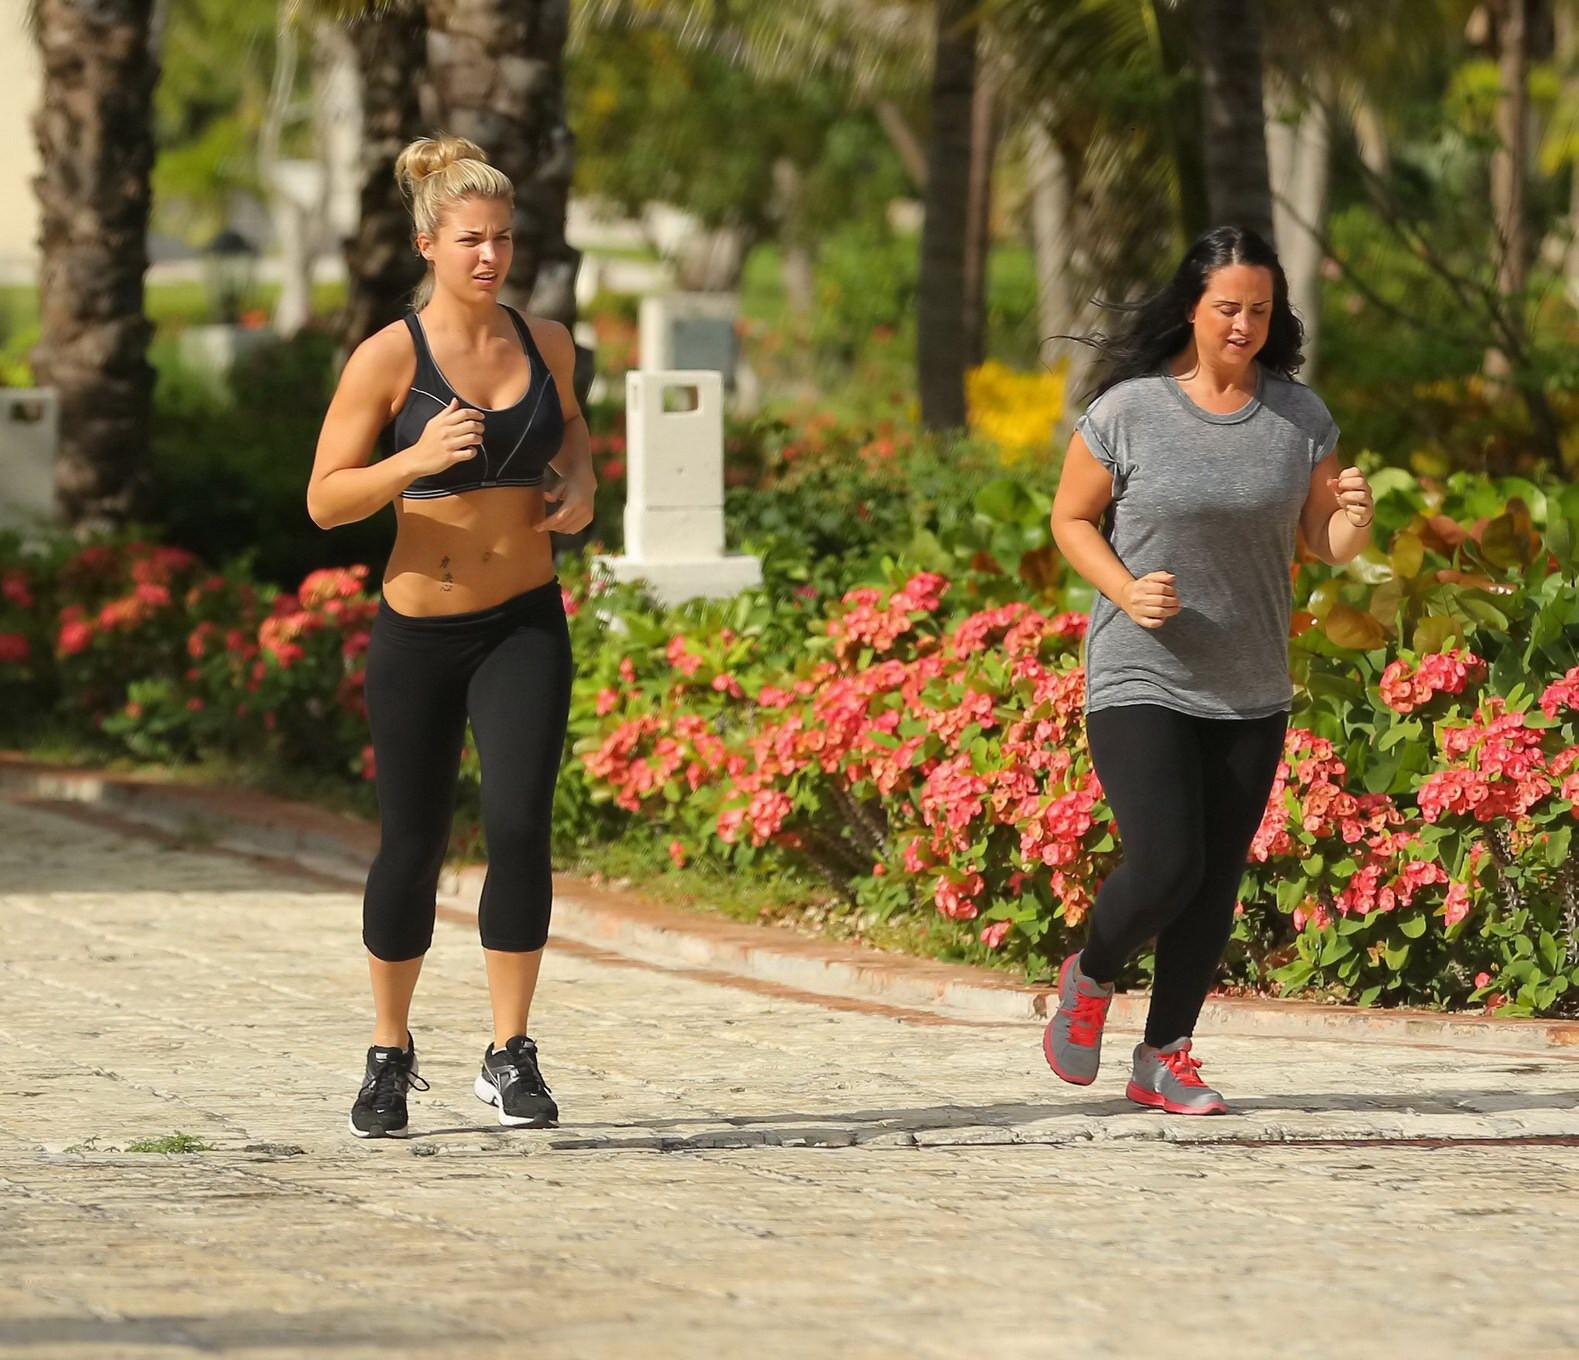 Gemma Atkinson busty and booty in black sports bra and tights during morning jog #75195238